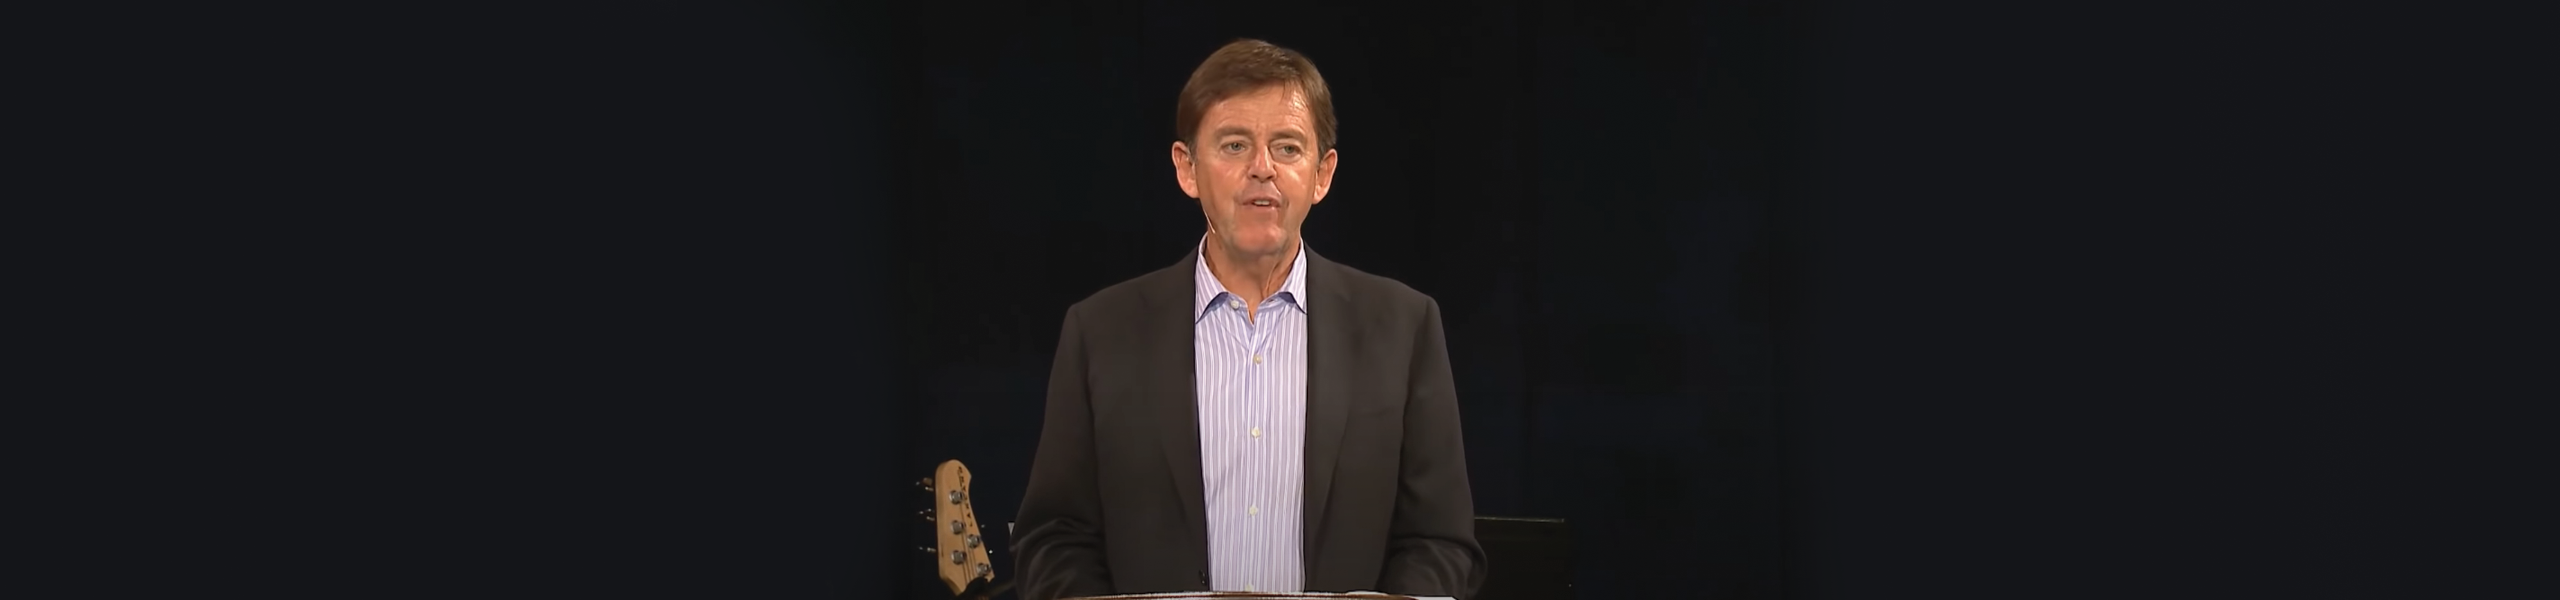 And He Shall Reign: A Study in the Book of Daniel | Alistair Begg